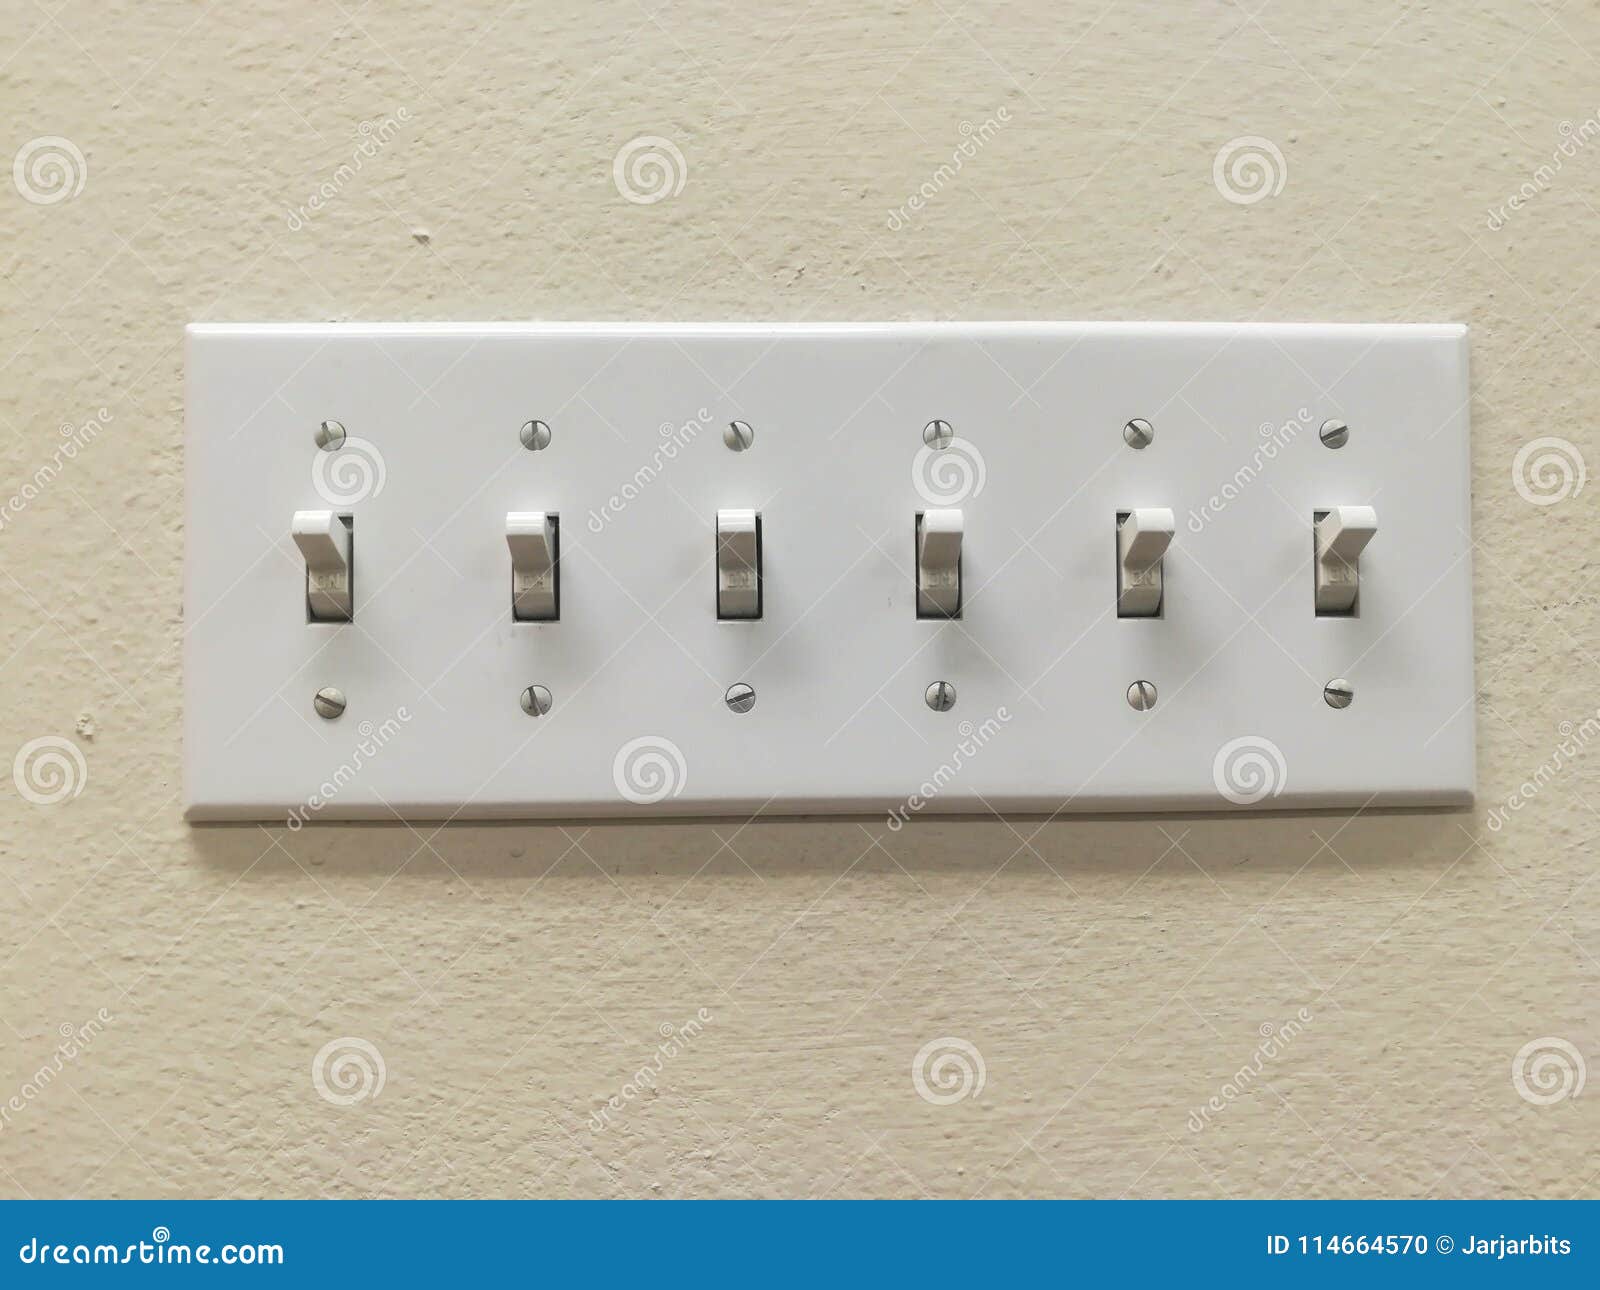 multiple light switches grouped together